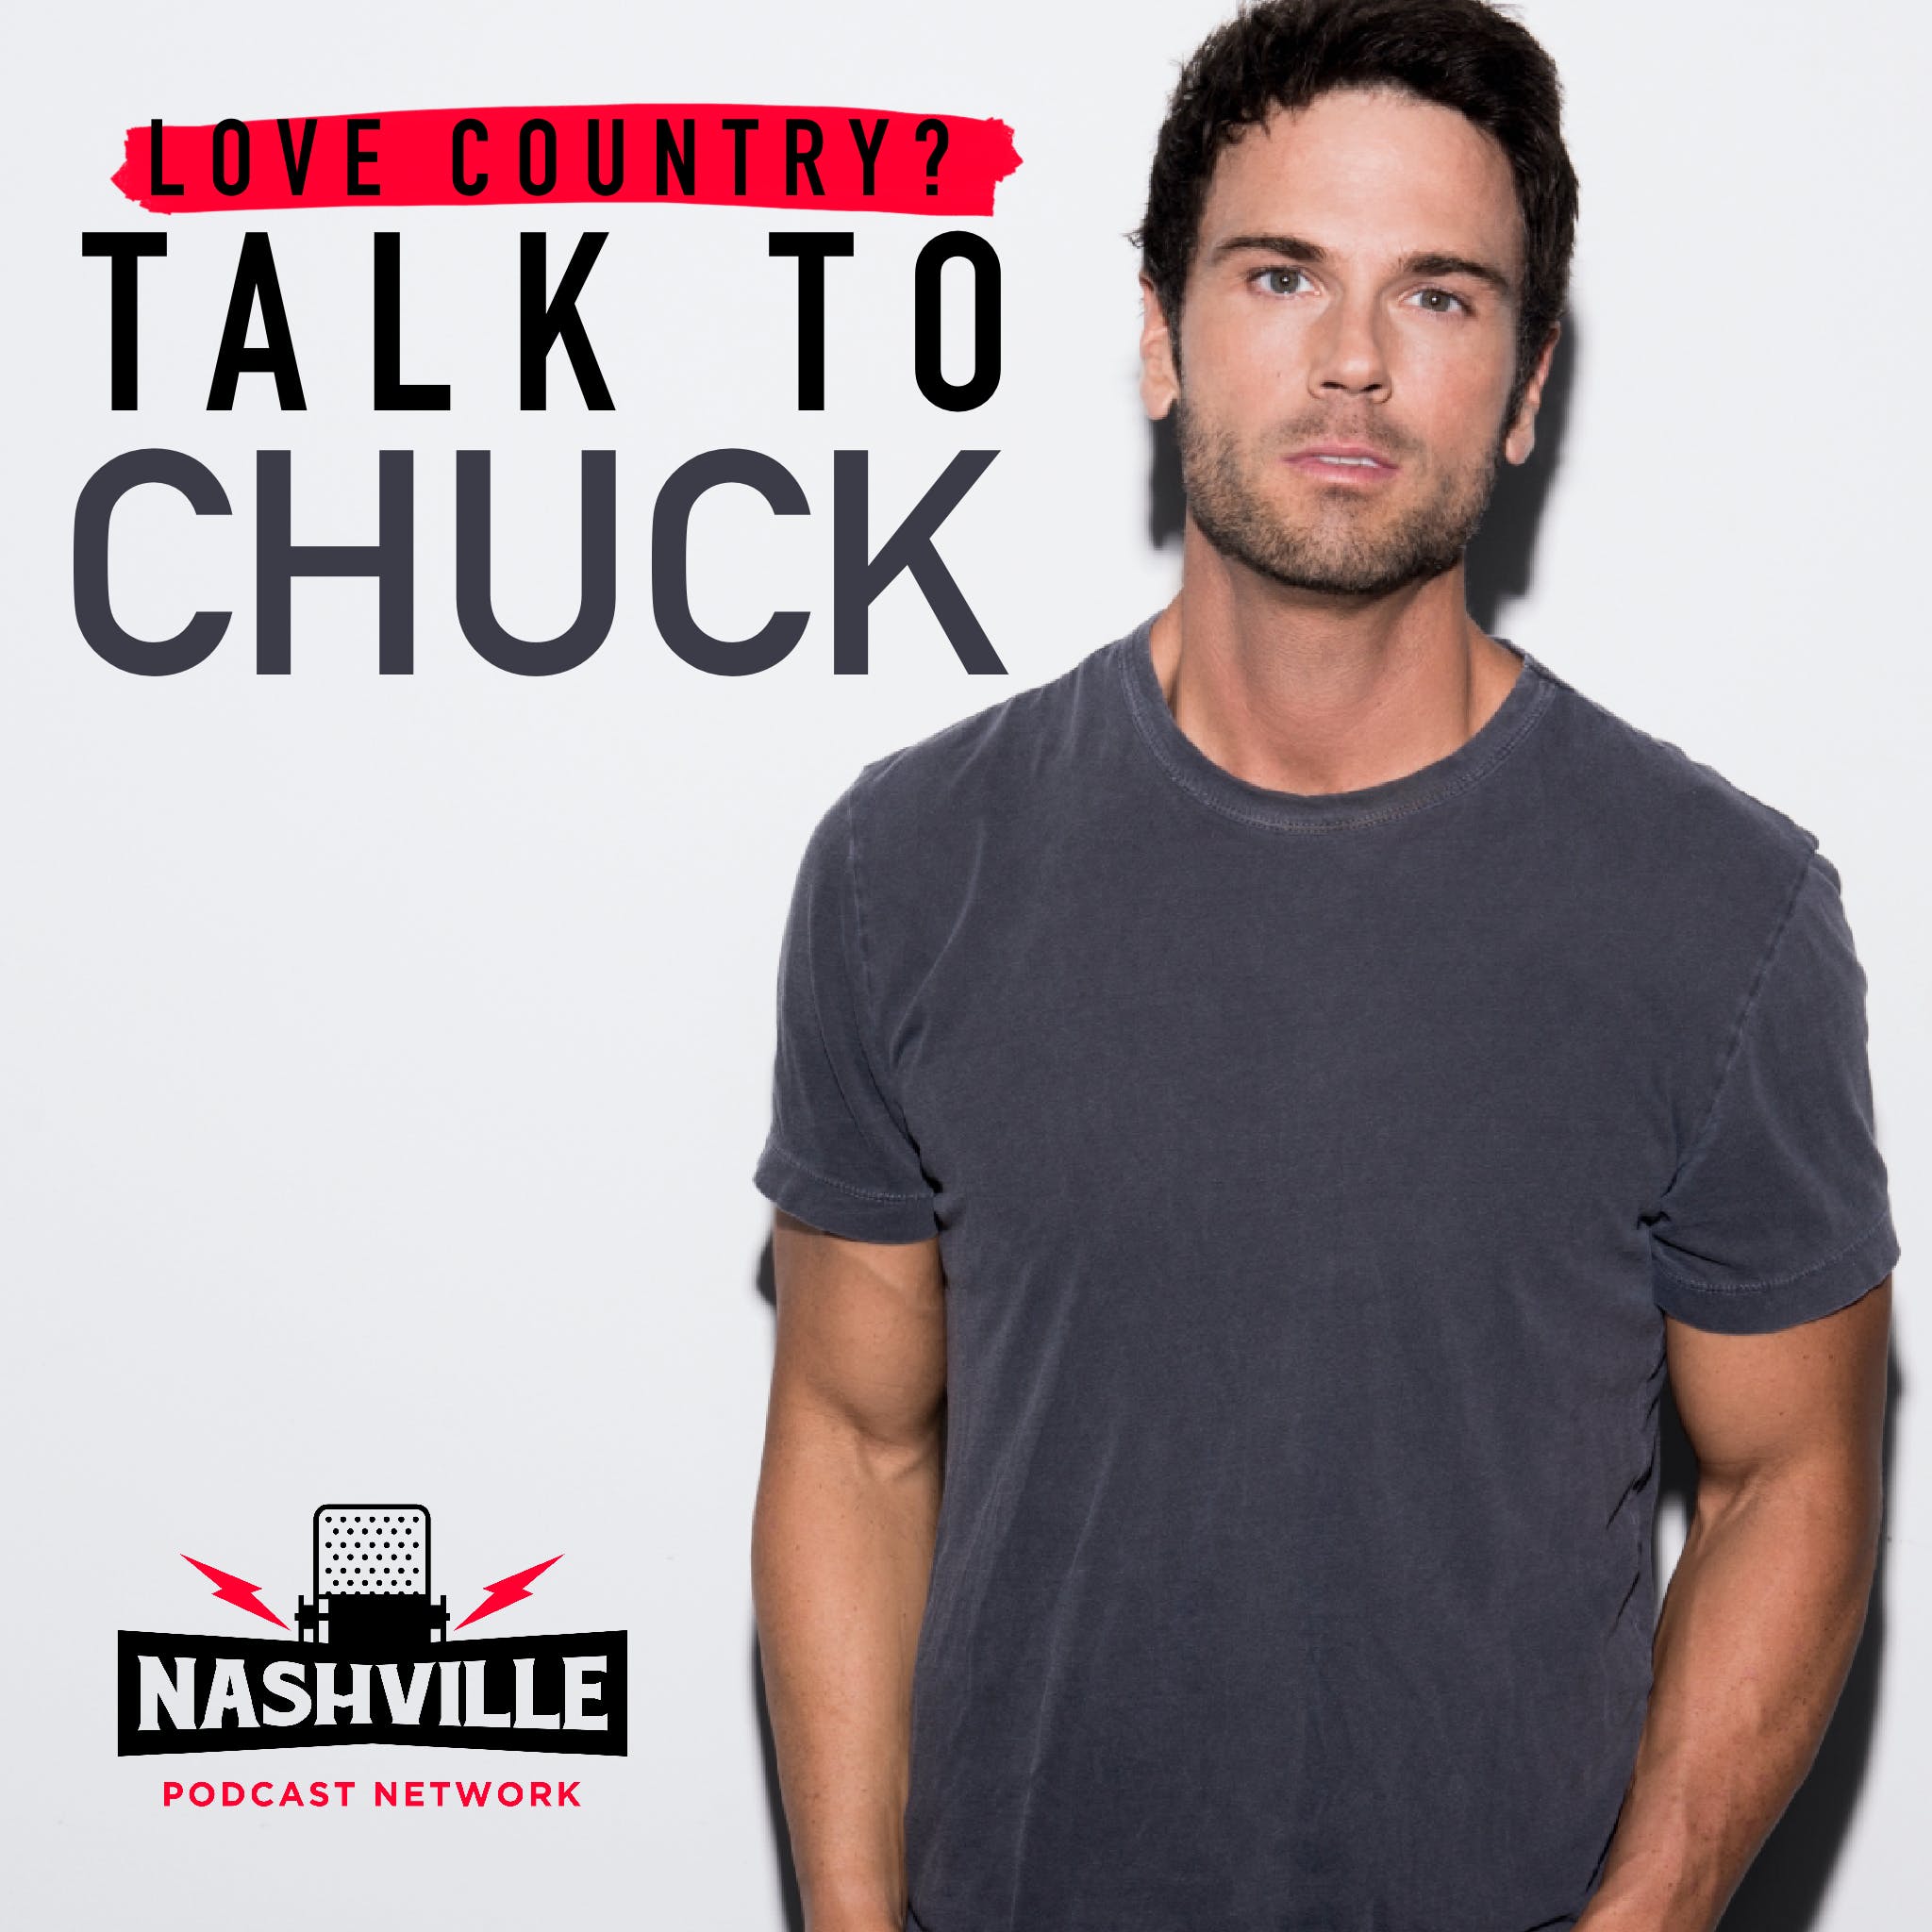 Chuck Talks About His New EP!